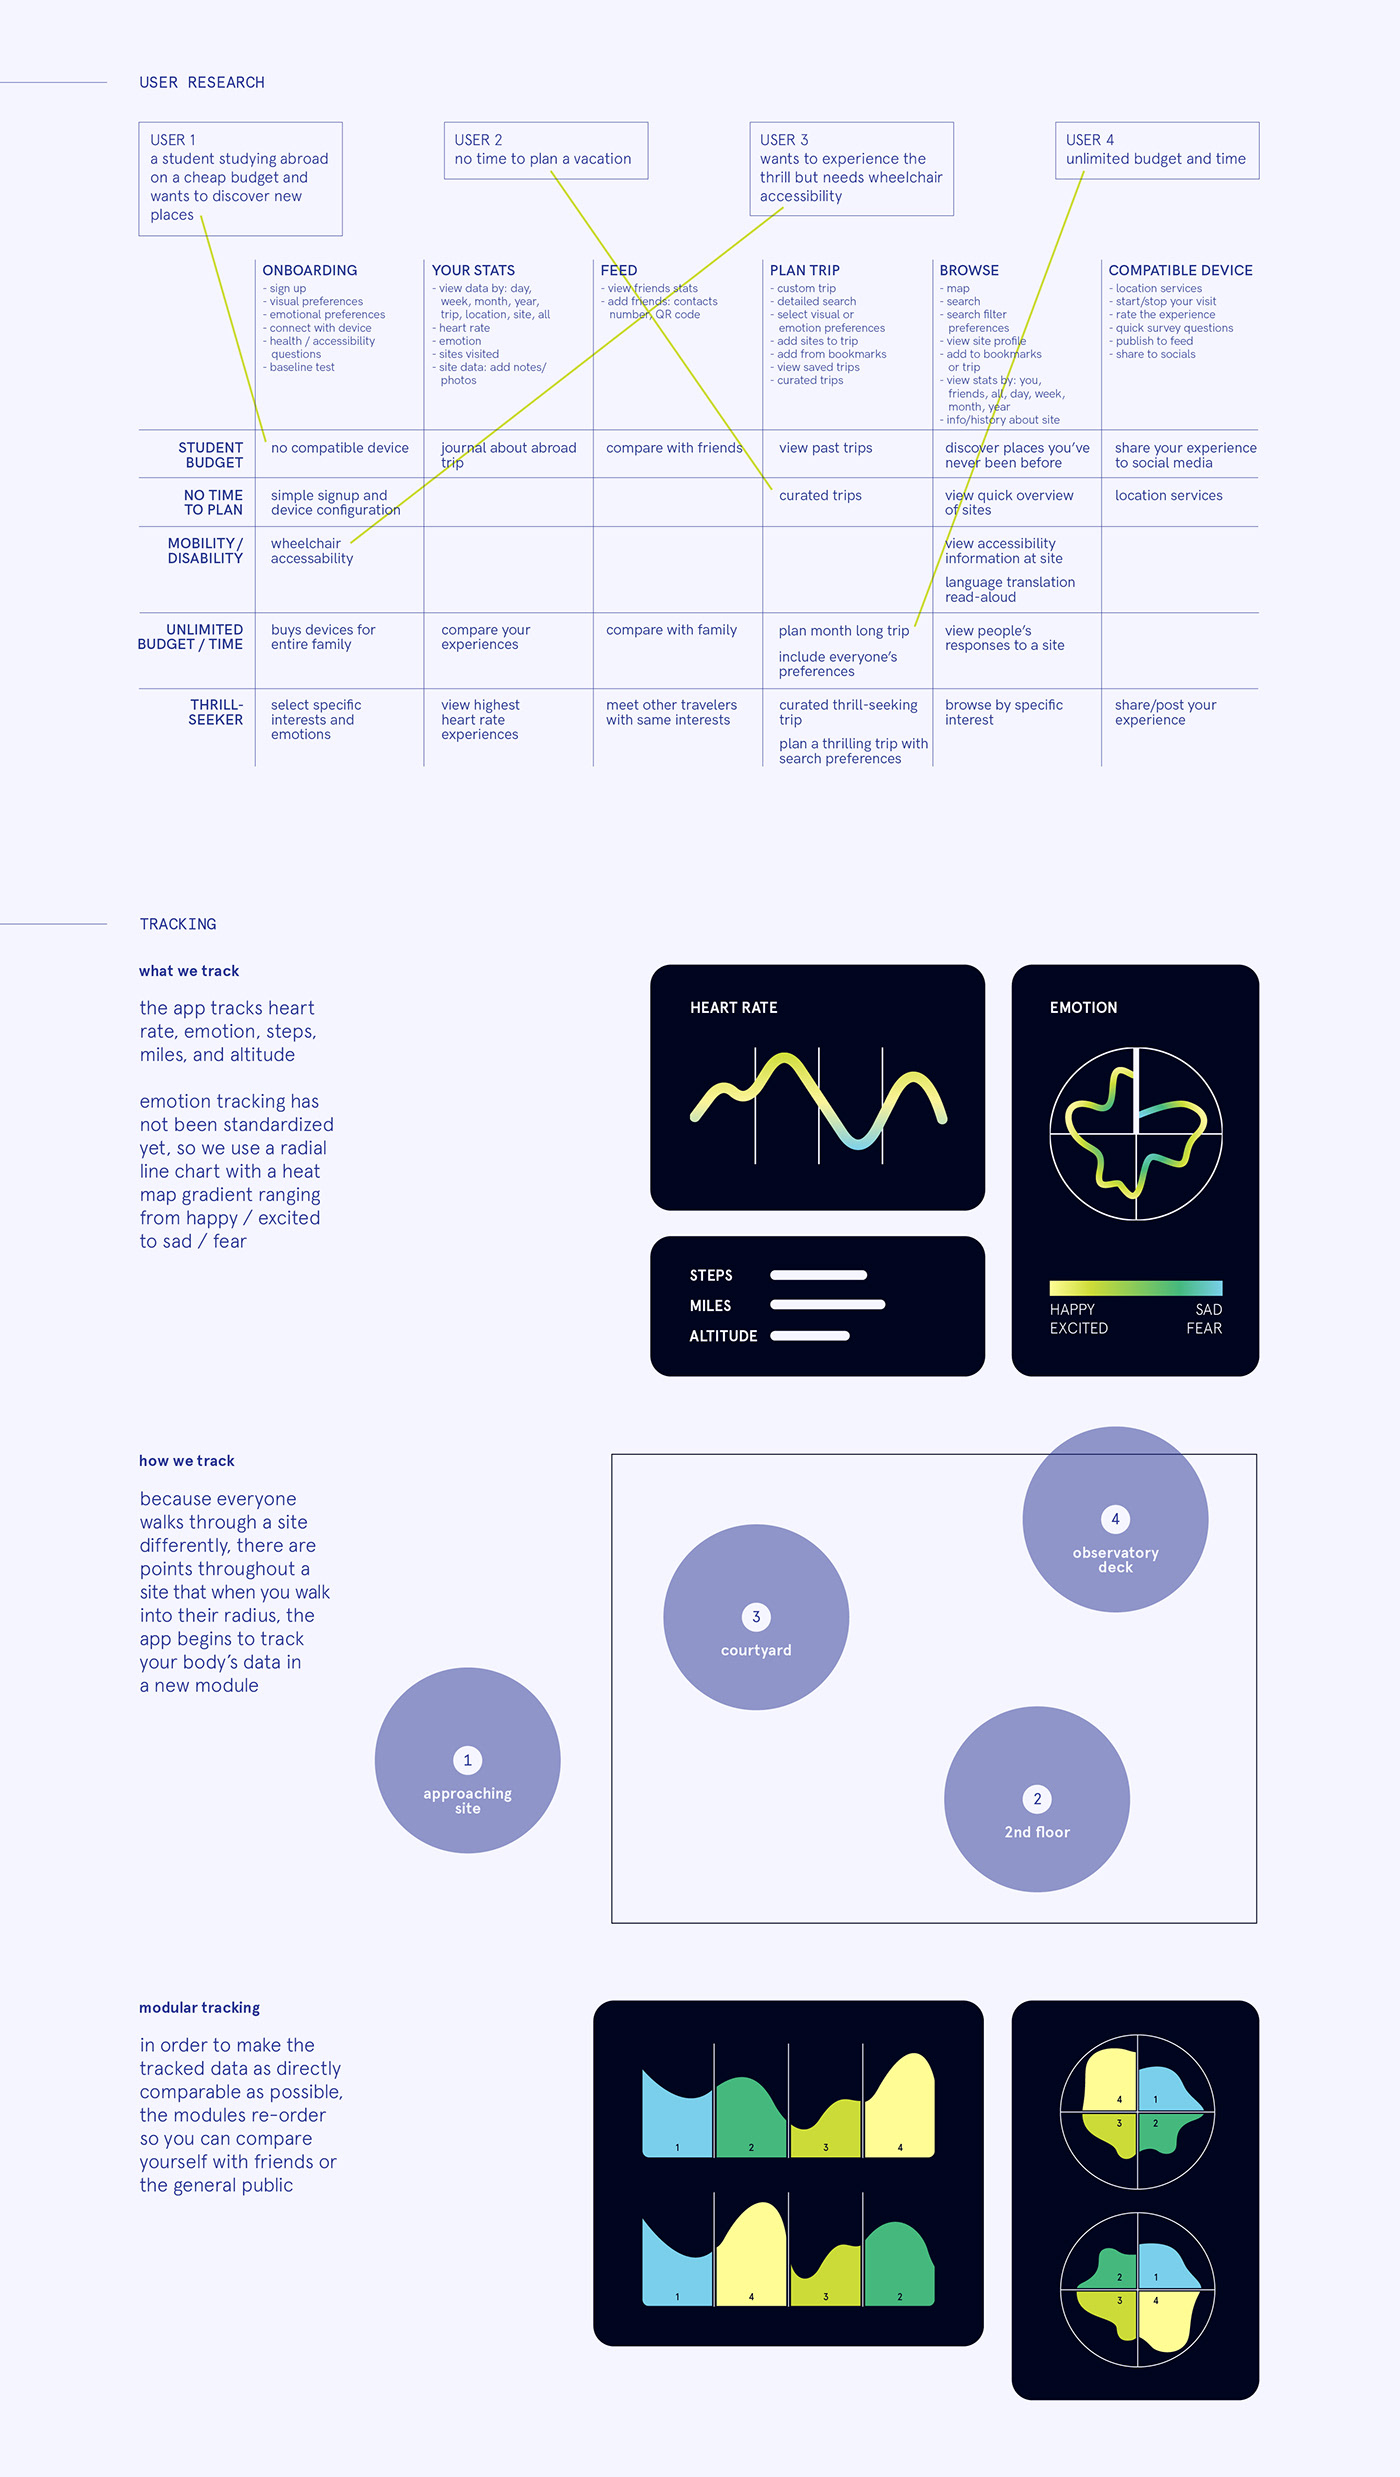 app design architecture tracking app Data biodata apple watch adobeawards physiological emotions